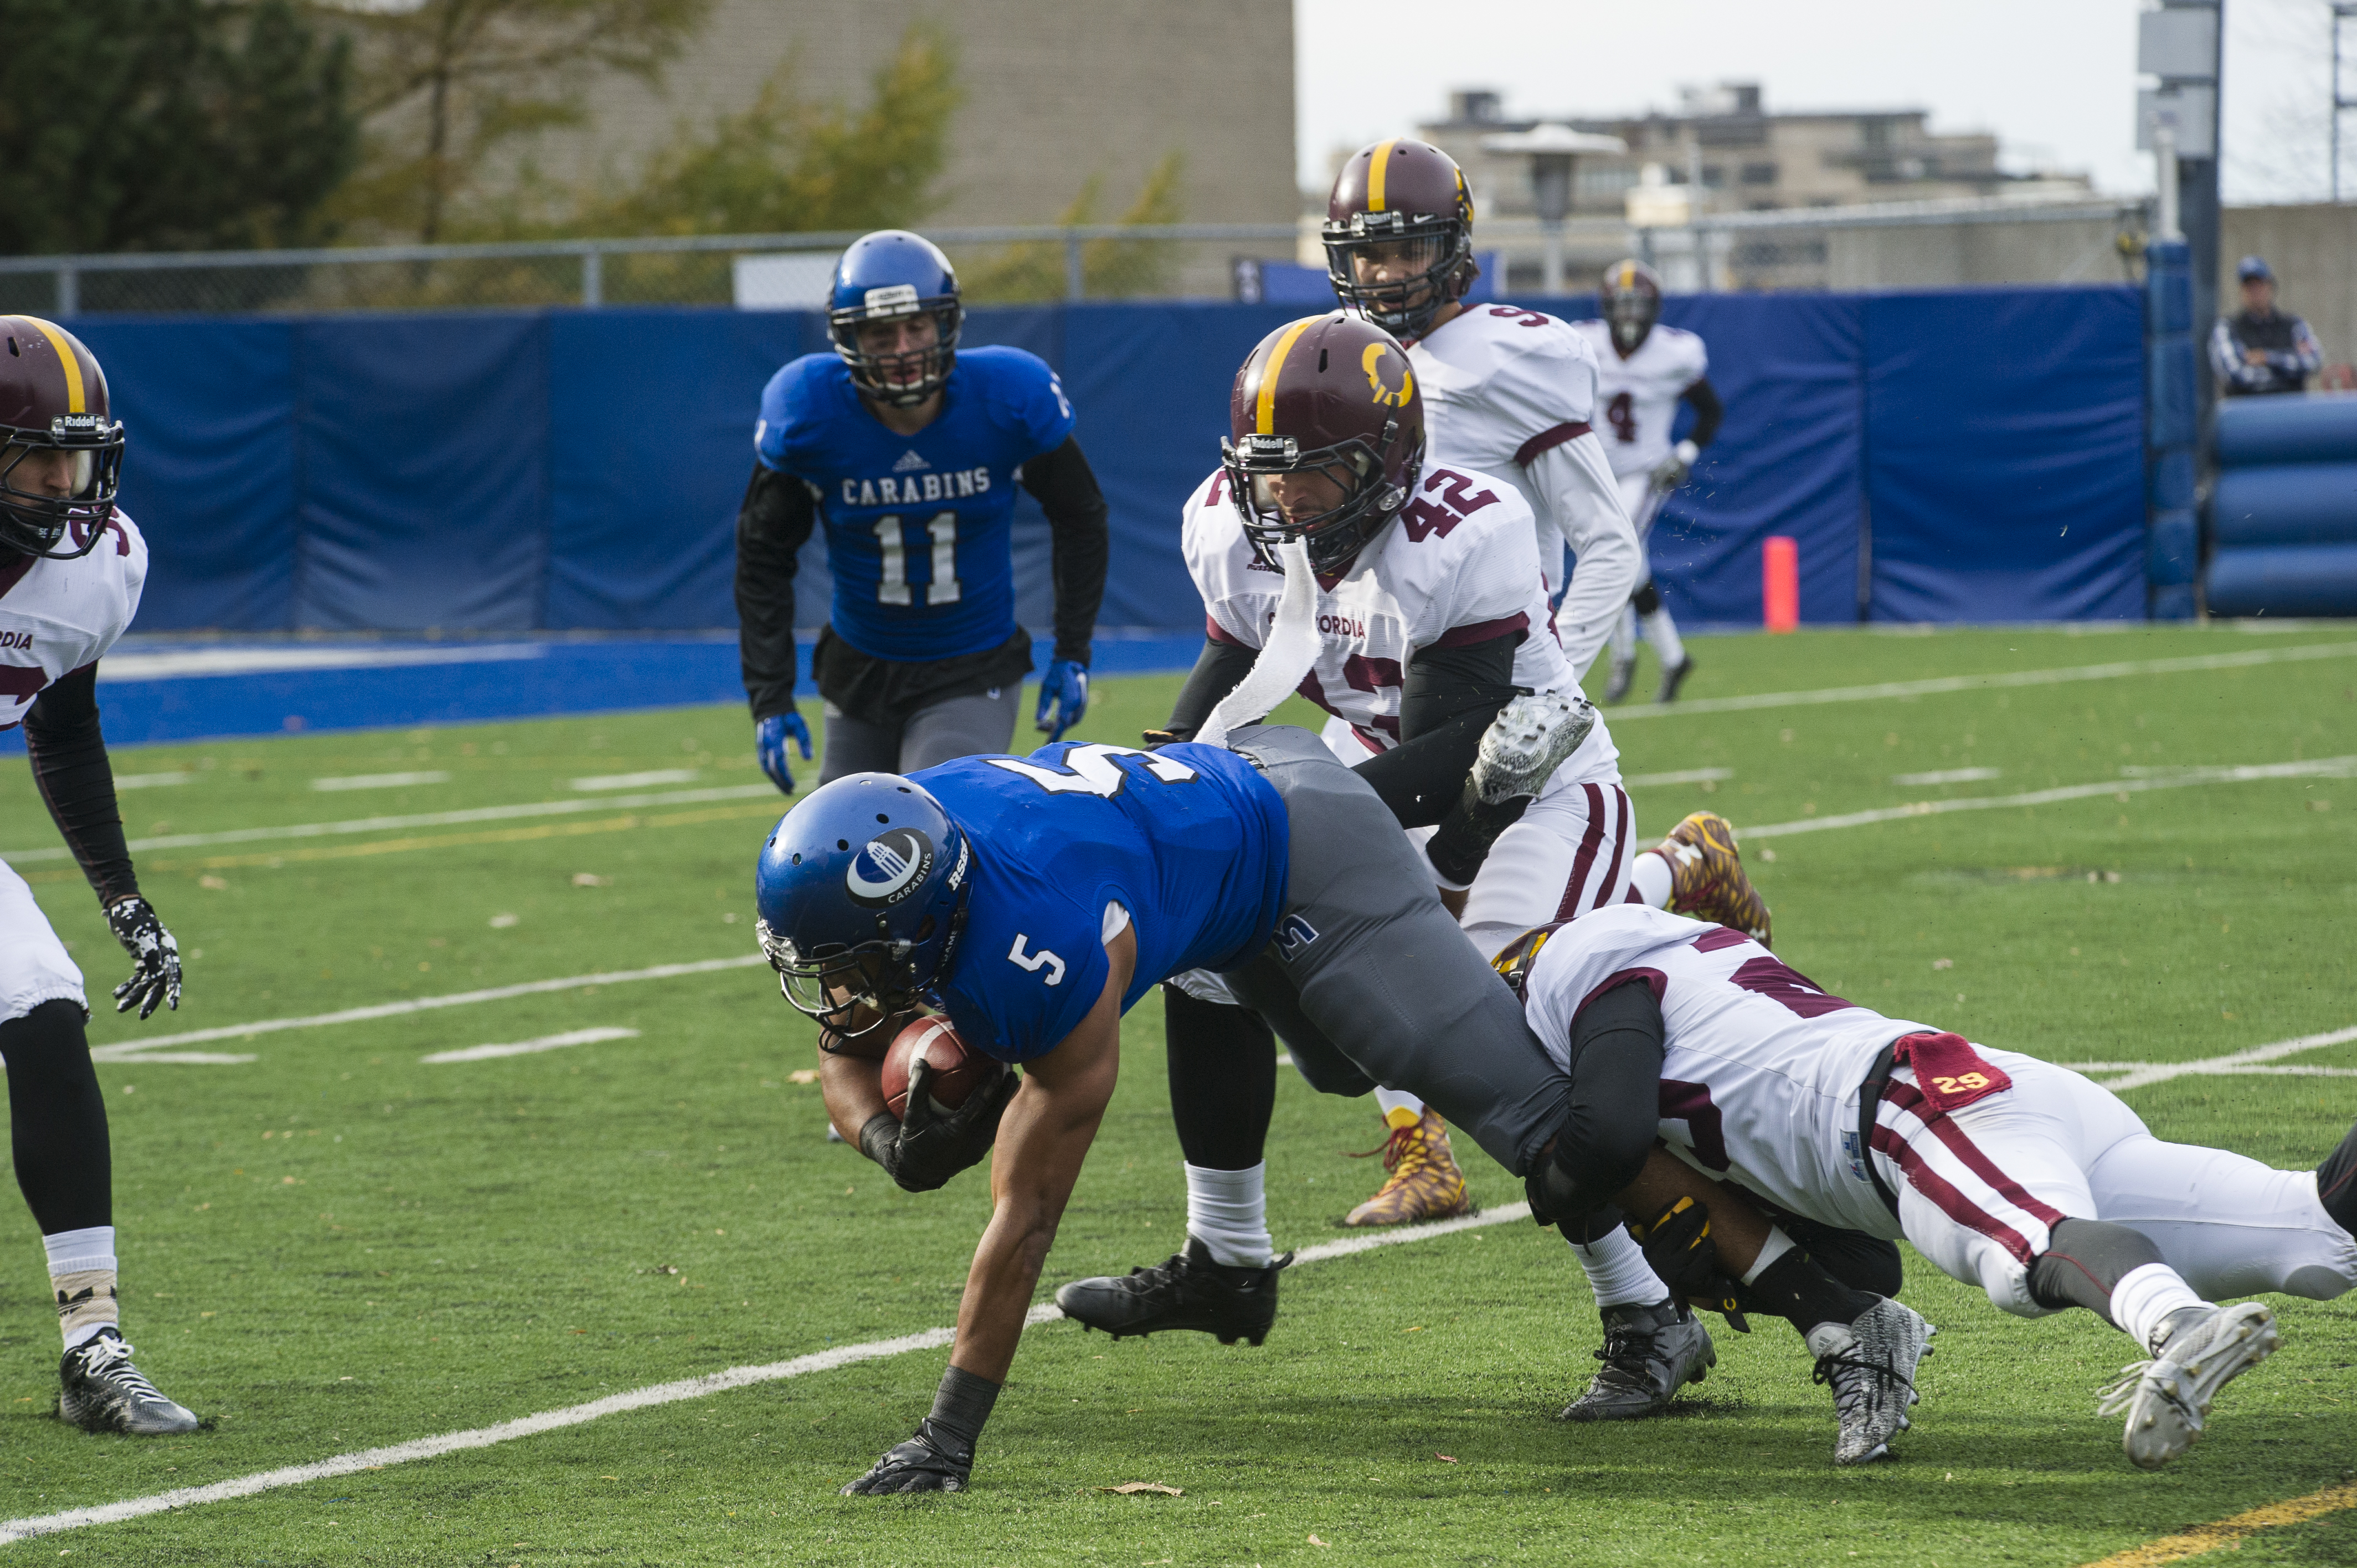 Stingers players tackle a Carabins ball-carrier near the sideline. Photo by Andrej Ivanov.